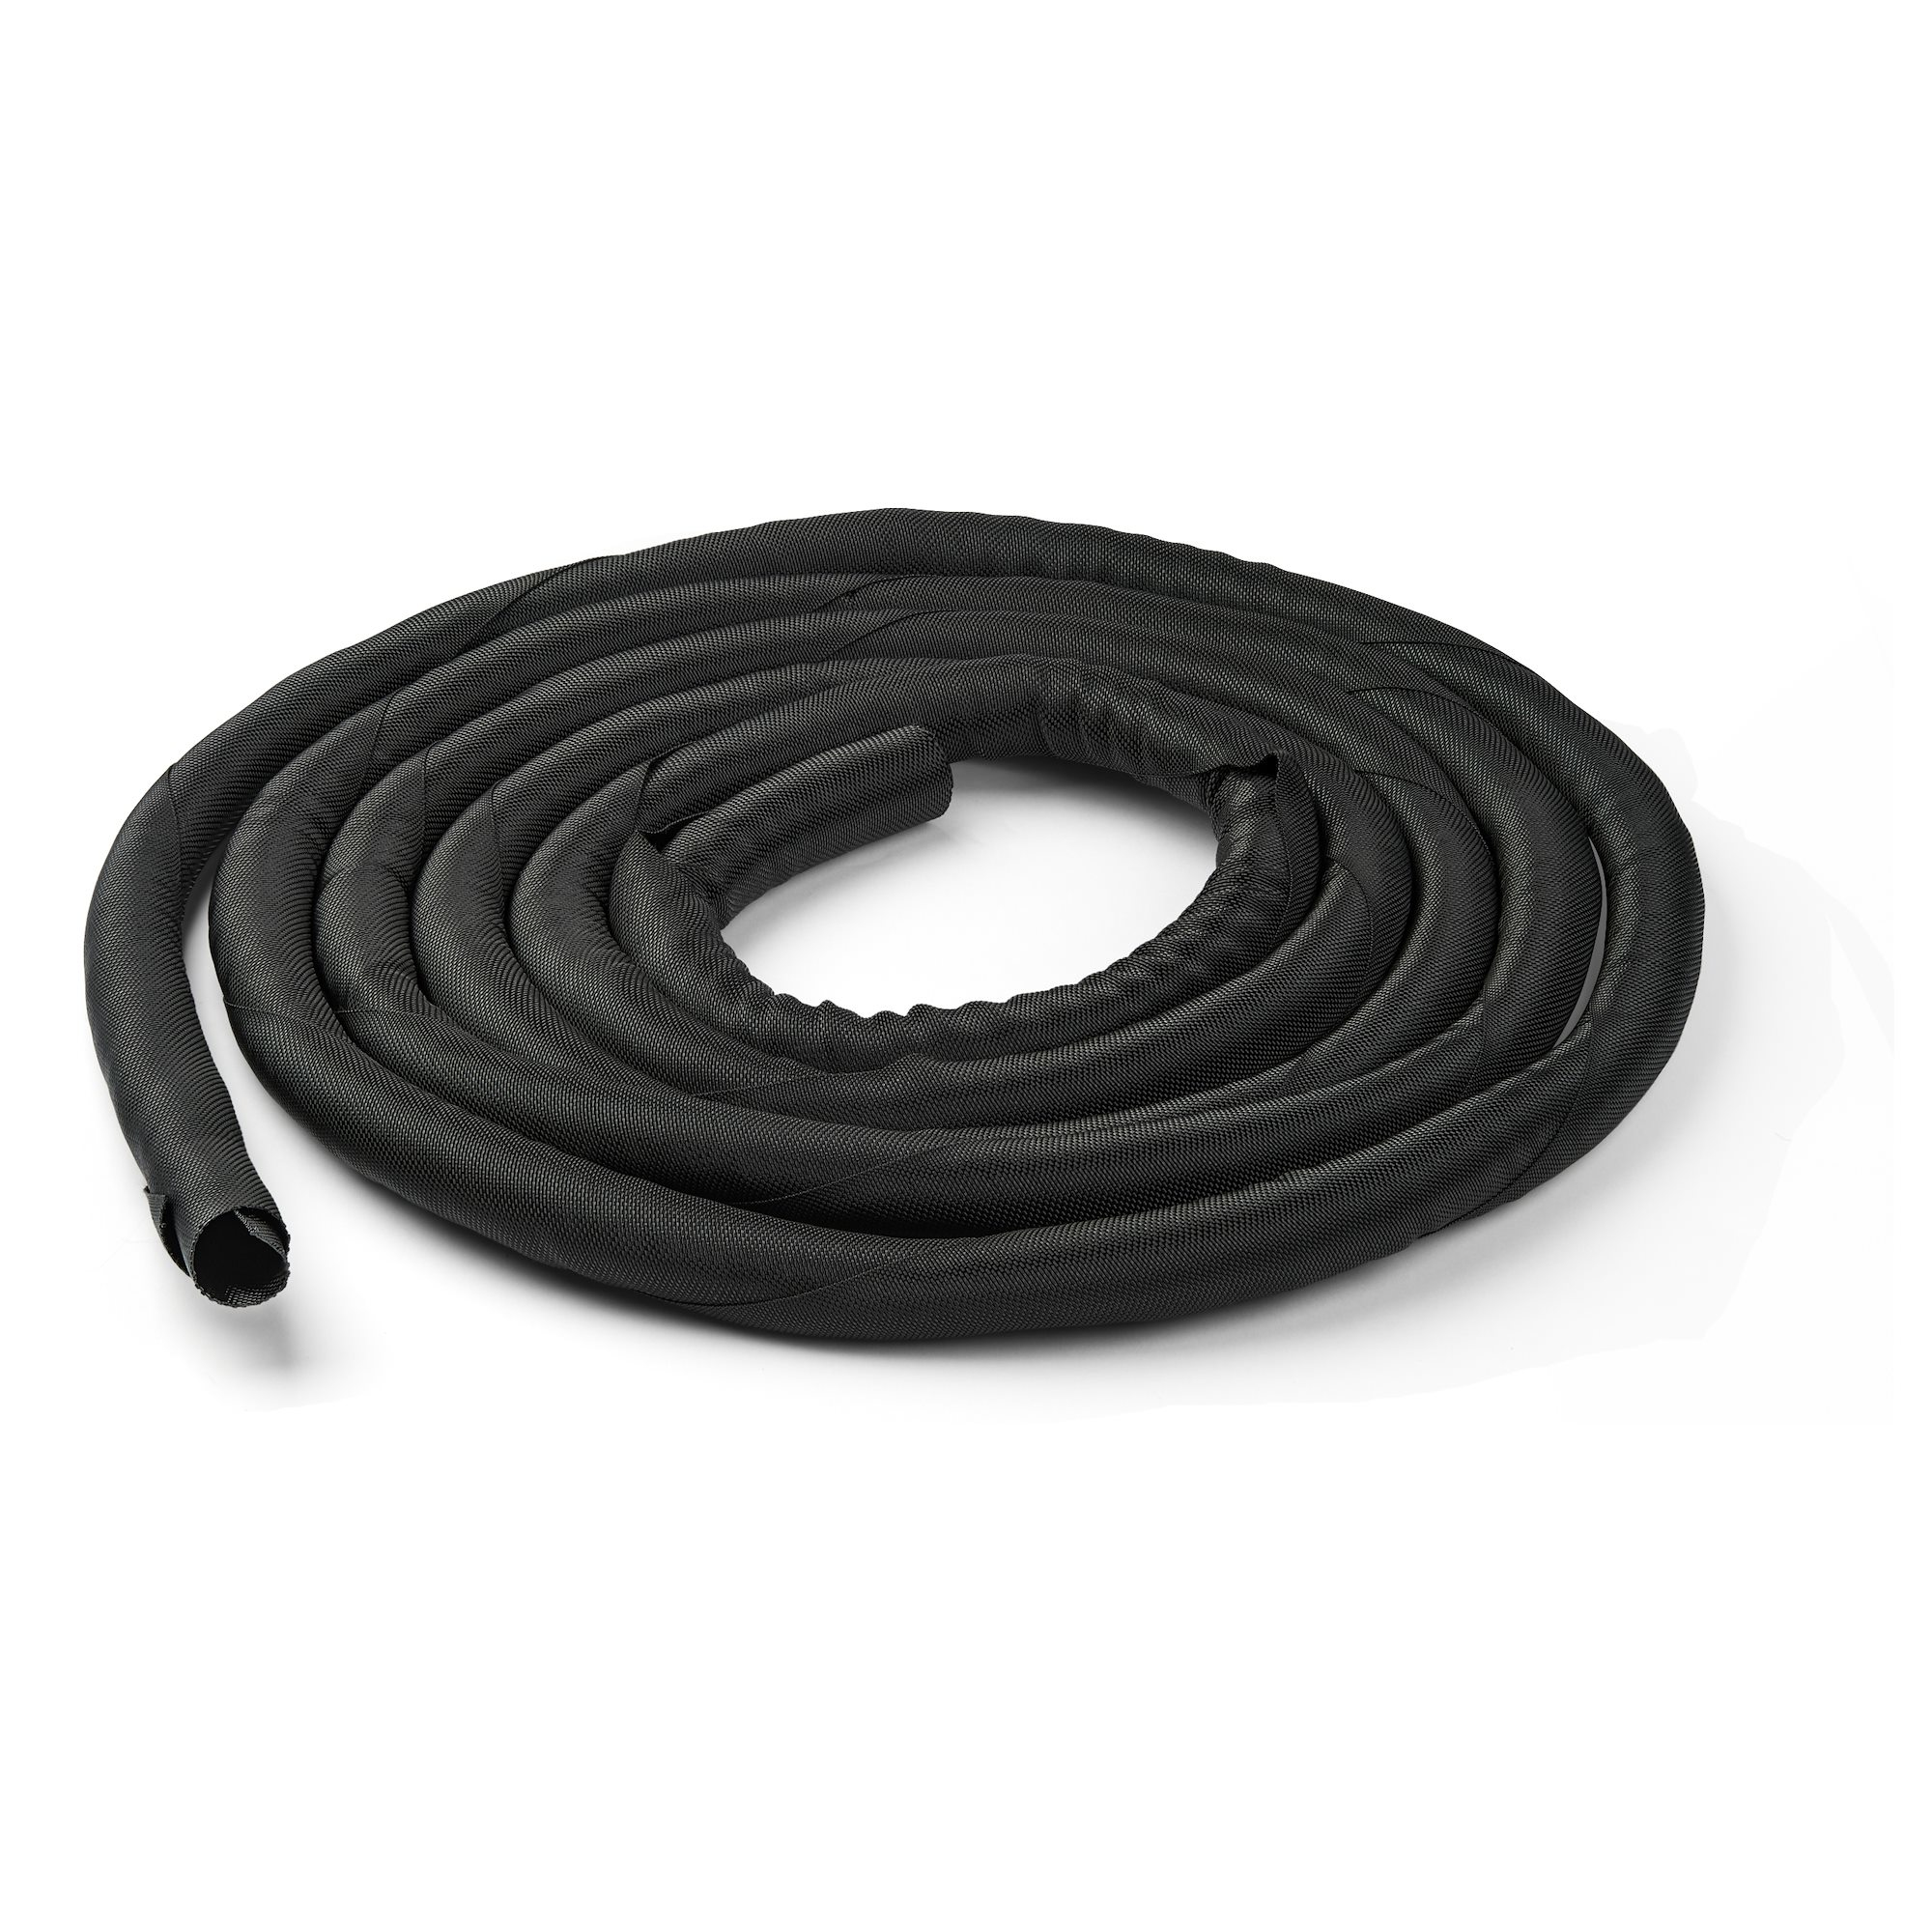 StarTech.com 15' (4.6m) Cable Management Sleeve, Flexible Coiled Cable Wrap, 1-1.5" Diameter Expandable Sleeve, Polyester Cord Manager/Protector/Concealer, Black Trimmable Cable Organizer - C - C2000